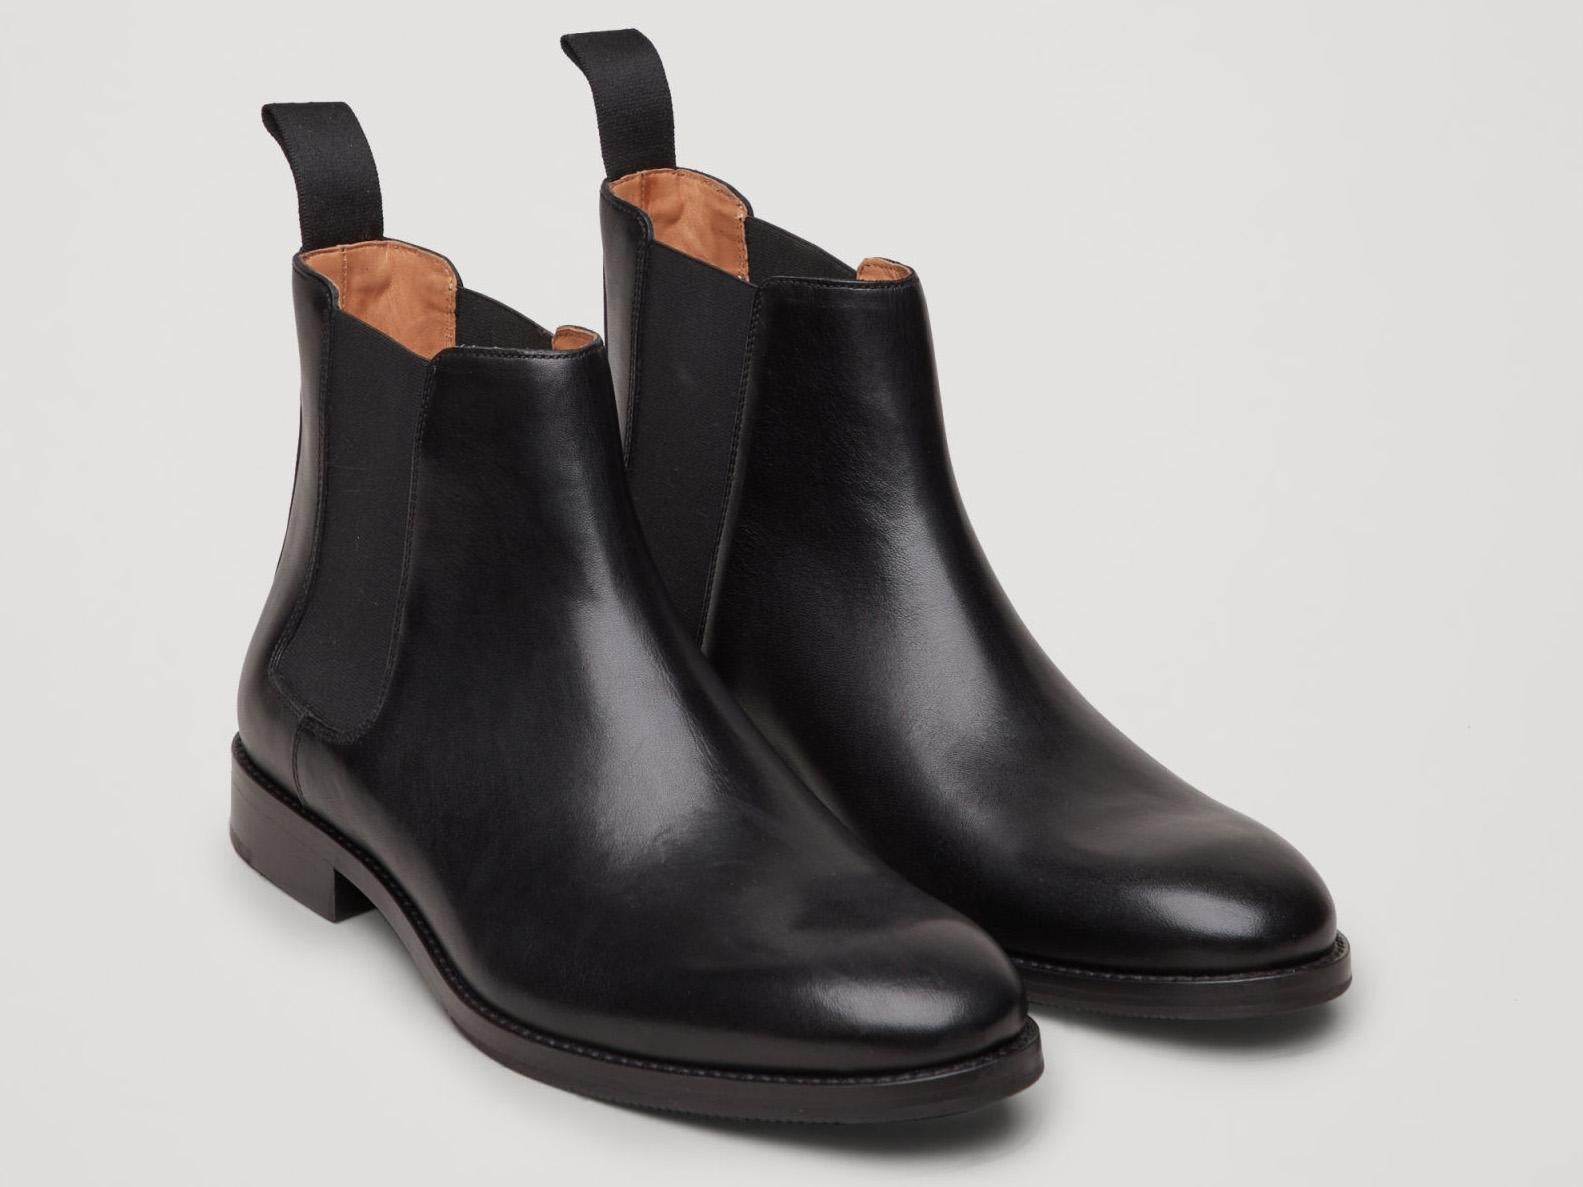 Leather Chelsea Boots, £135, Cos